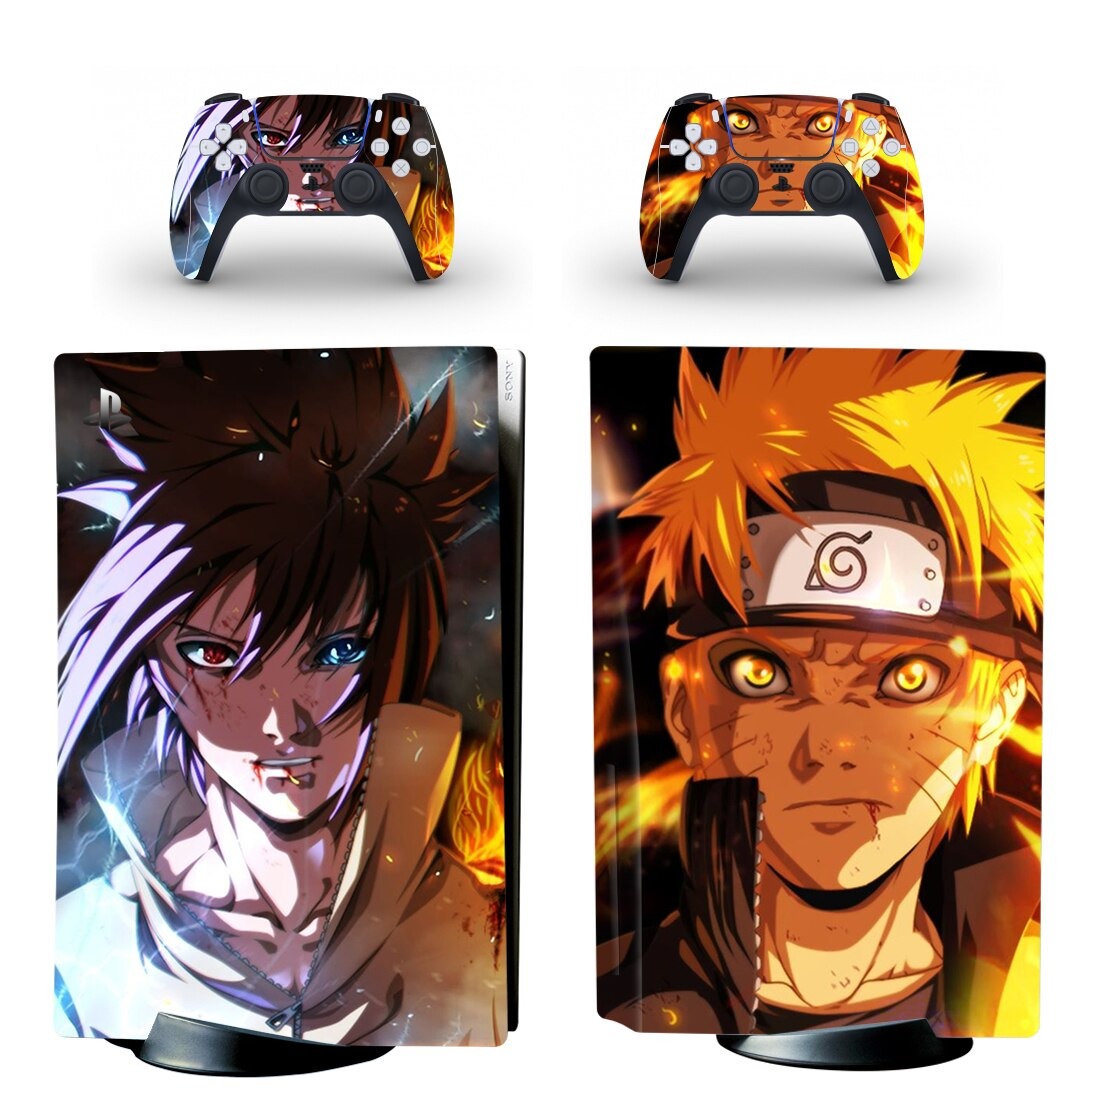 Regular PS4 Slim Pro PS5 Console Controller Red Cloud Skins Stickers Set  Anime Decals Wraps Akatsuki | Wish